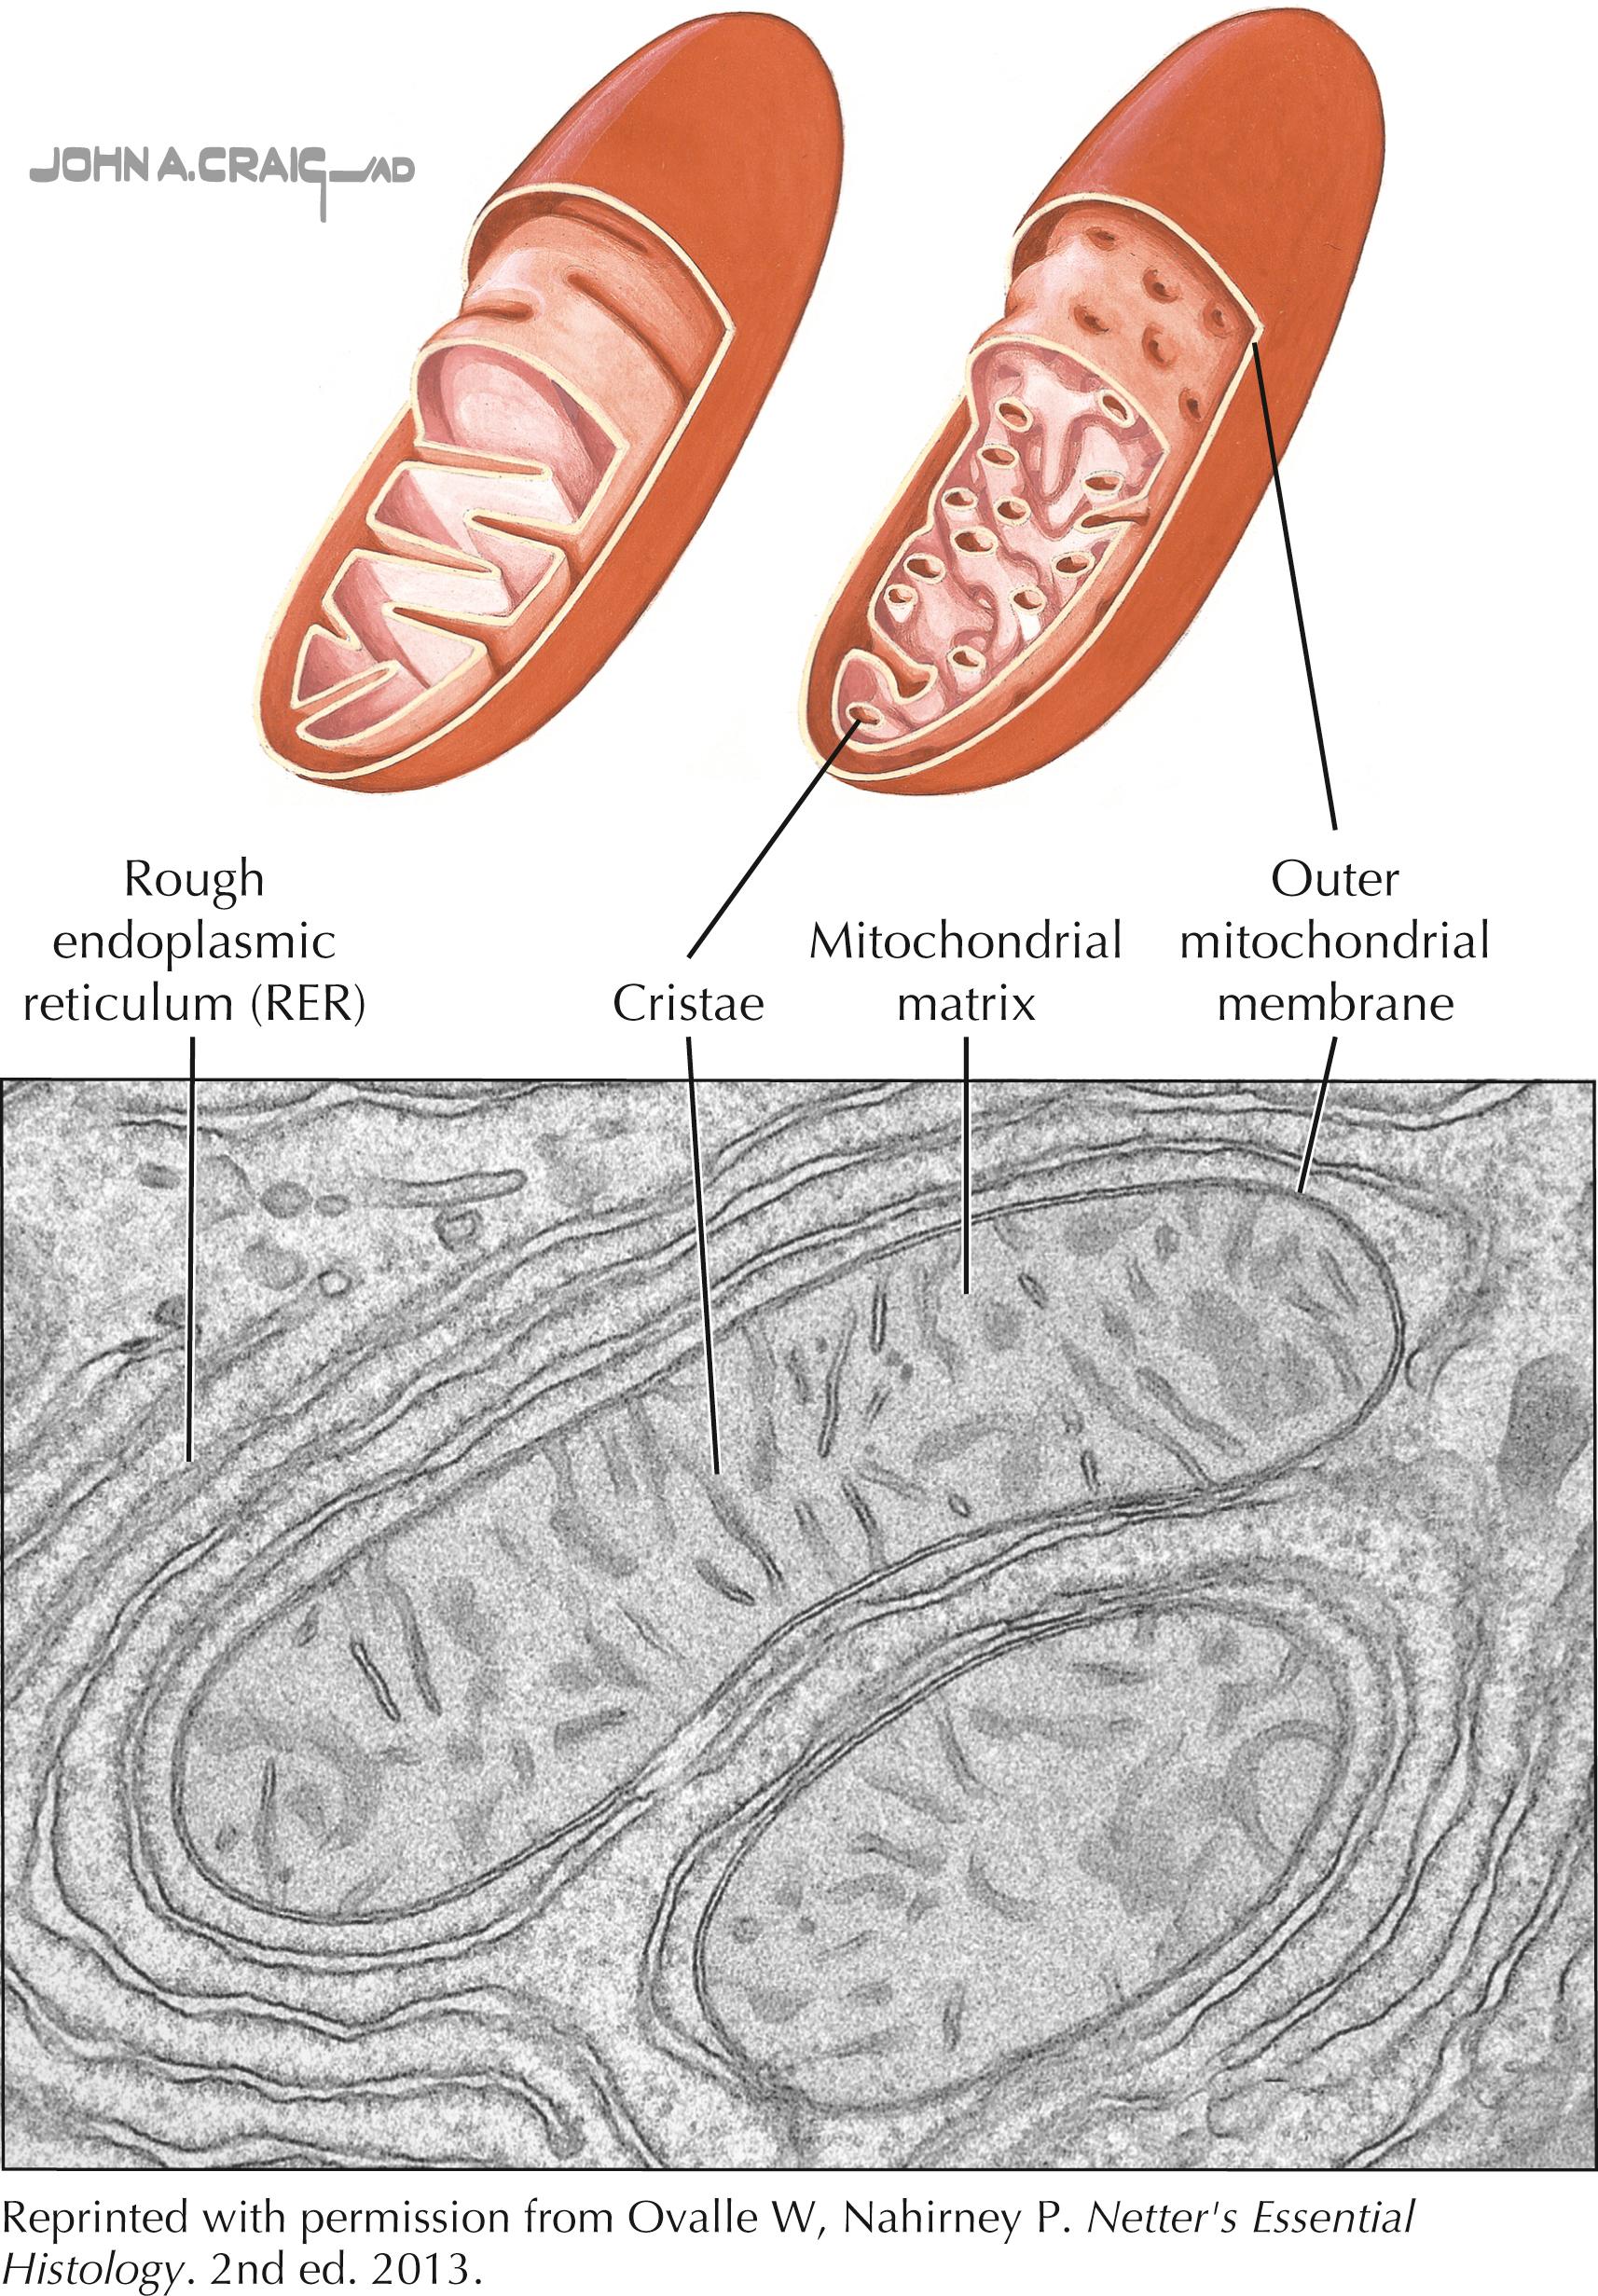 Figure 18.3, Schematic presentation of mitochondria and electron microscope image (EM) of mitochondria in a hepatocyte.